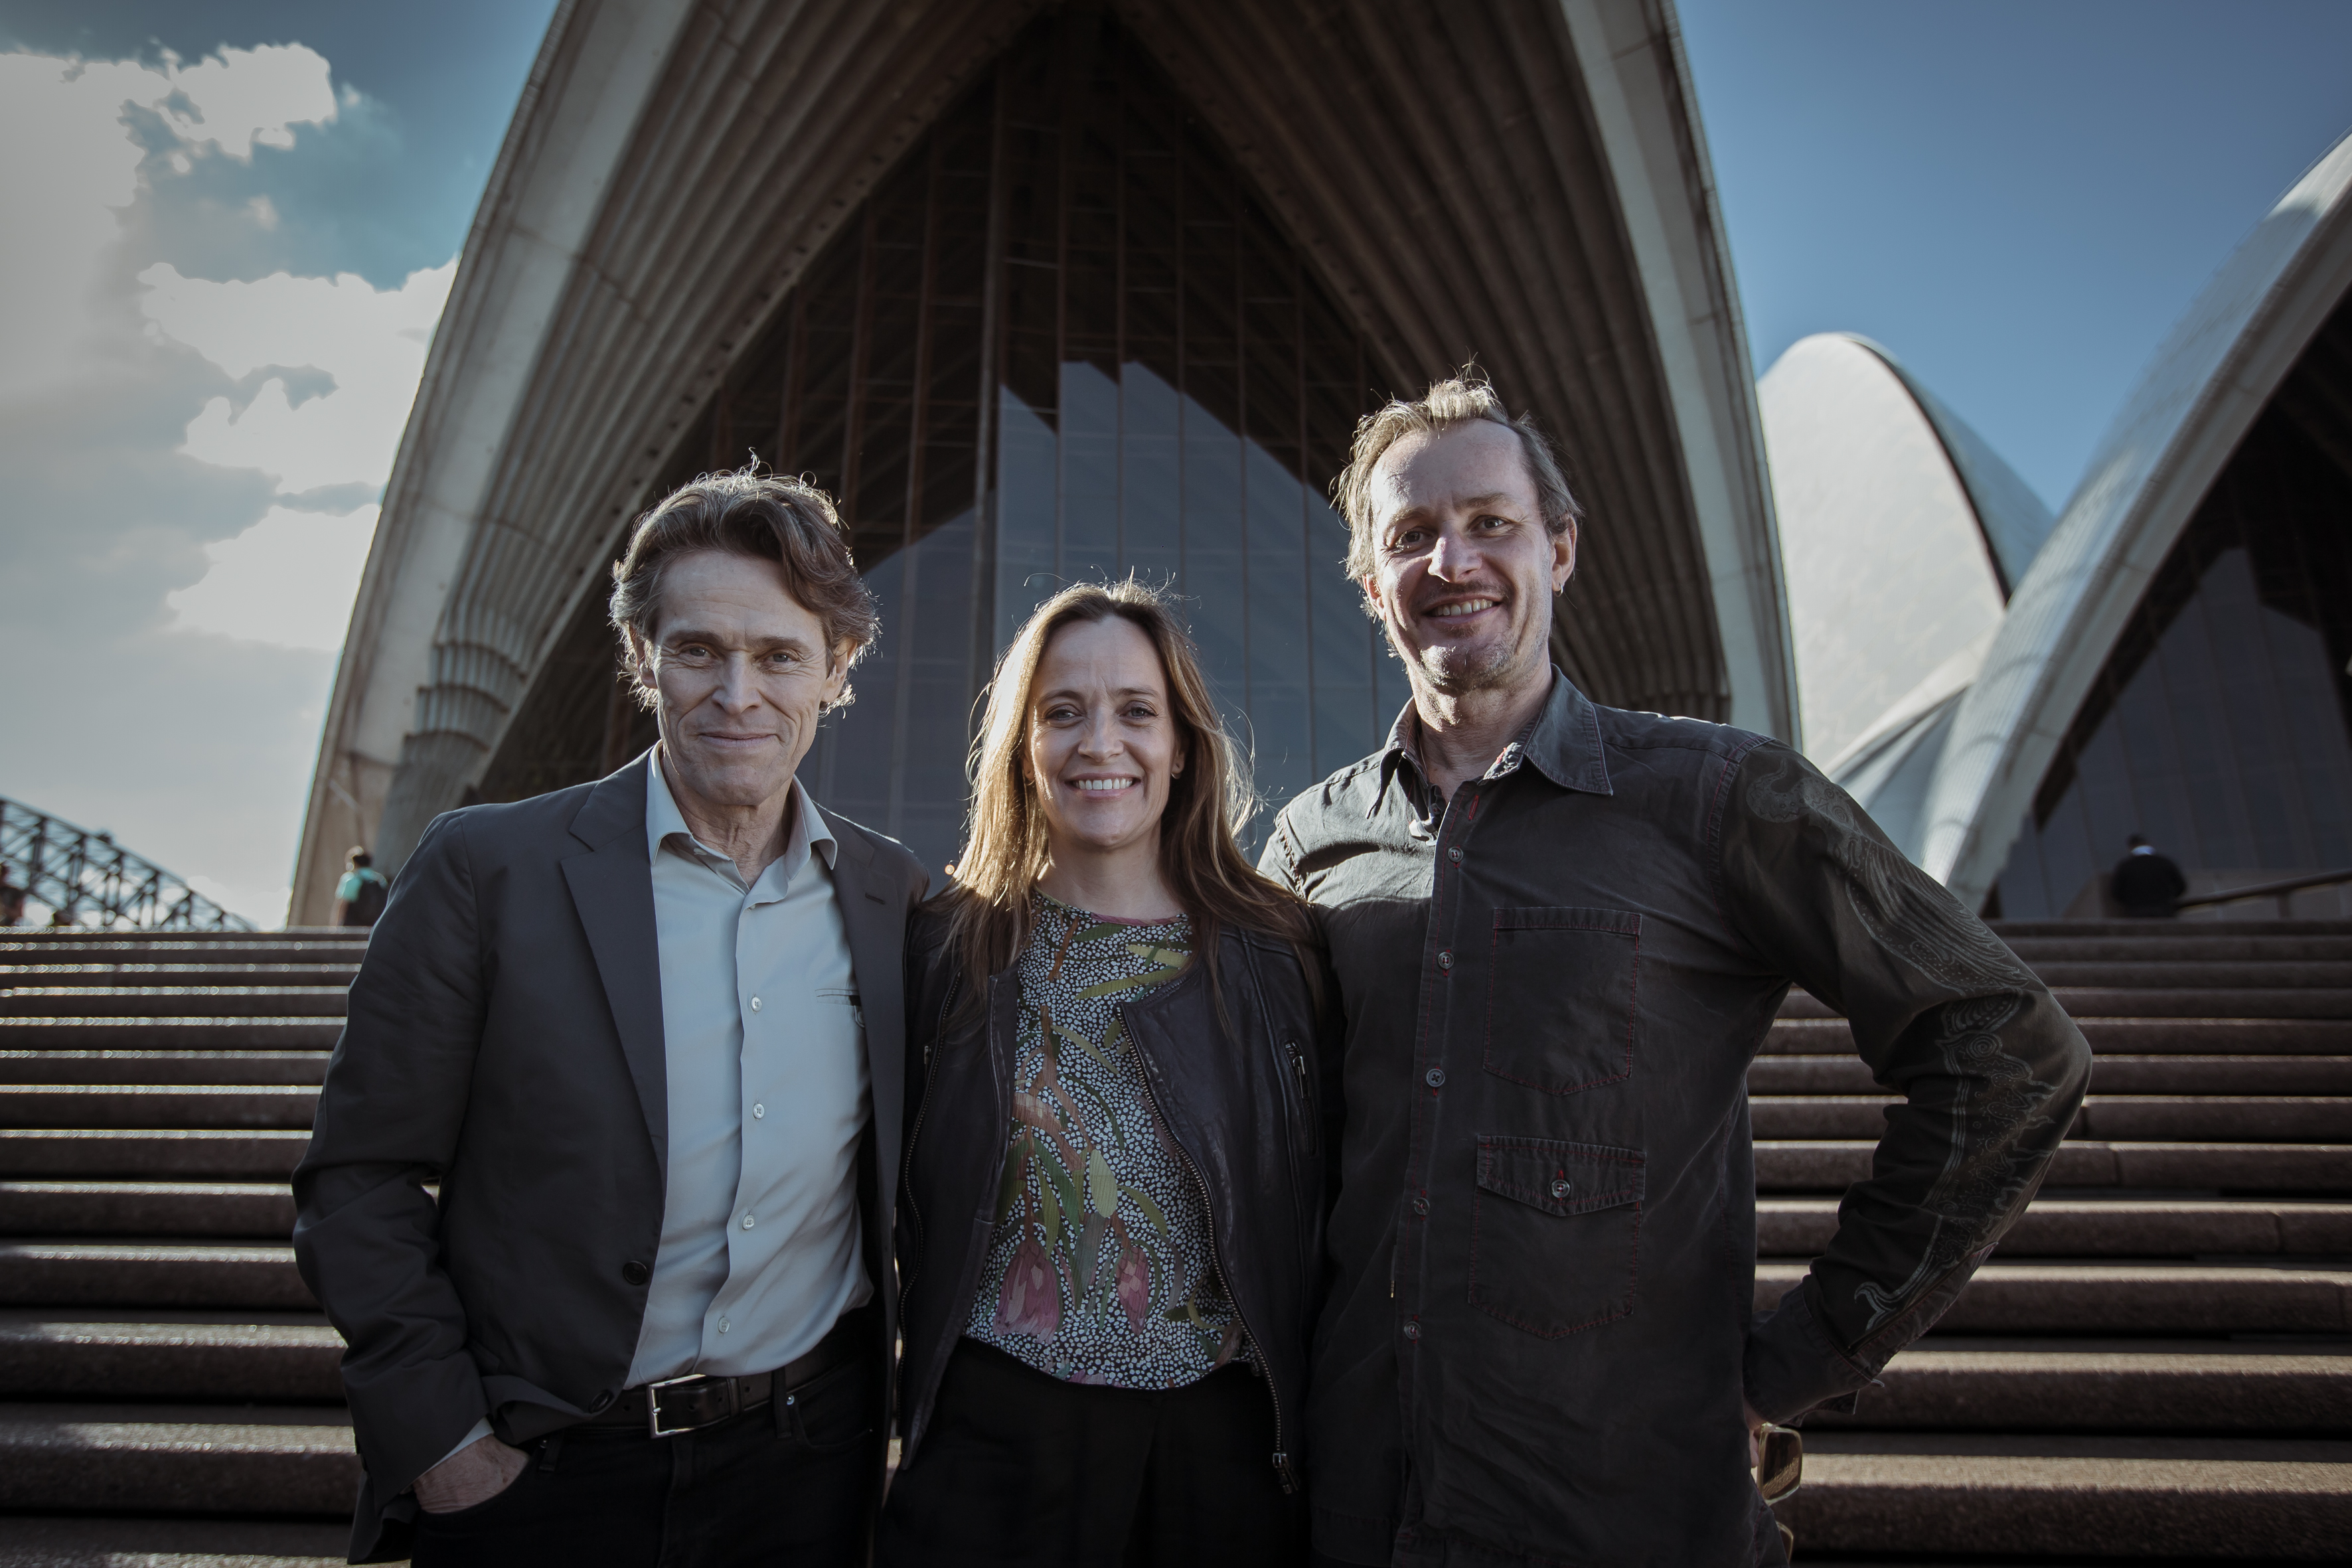 Richard Tognetti with director Jennifer Peedom and actor Willem Dafoe